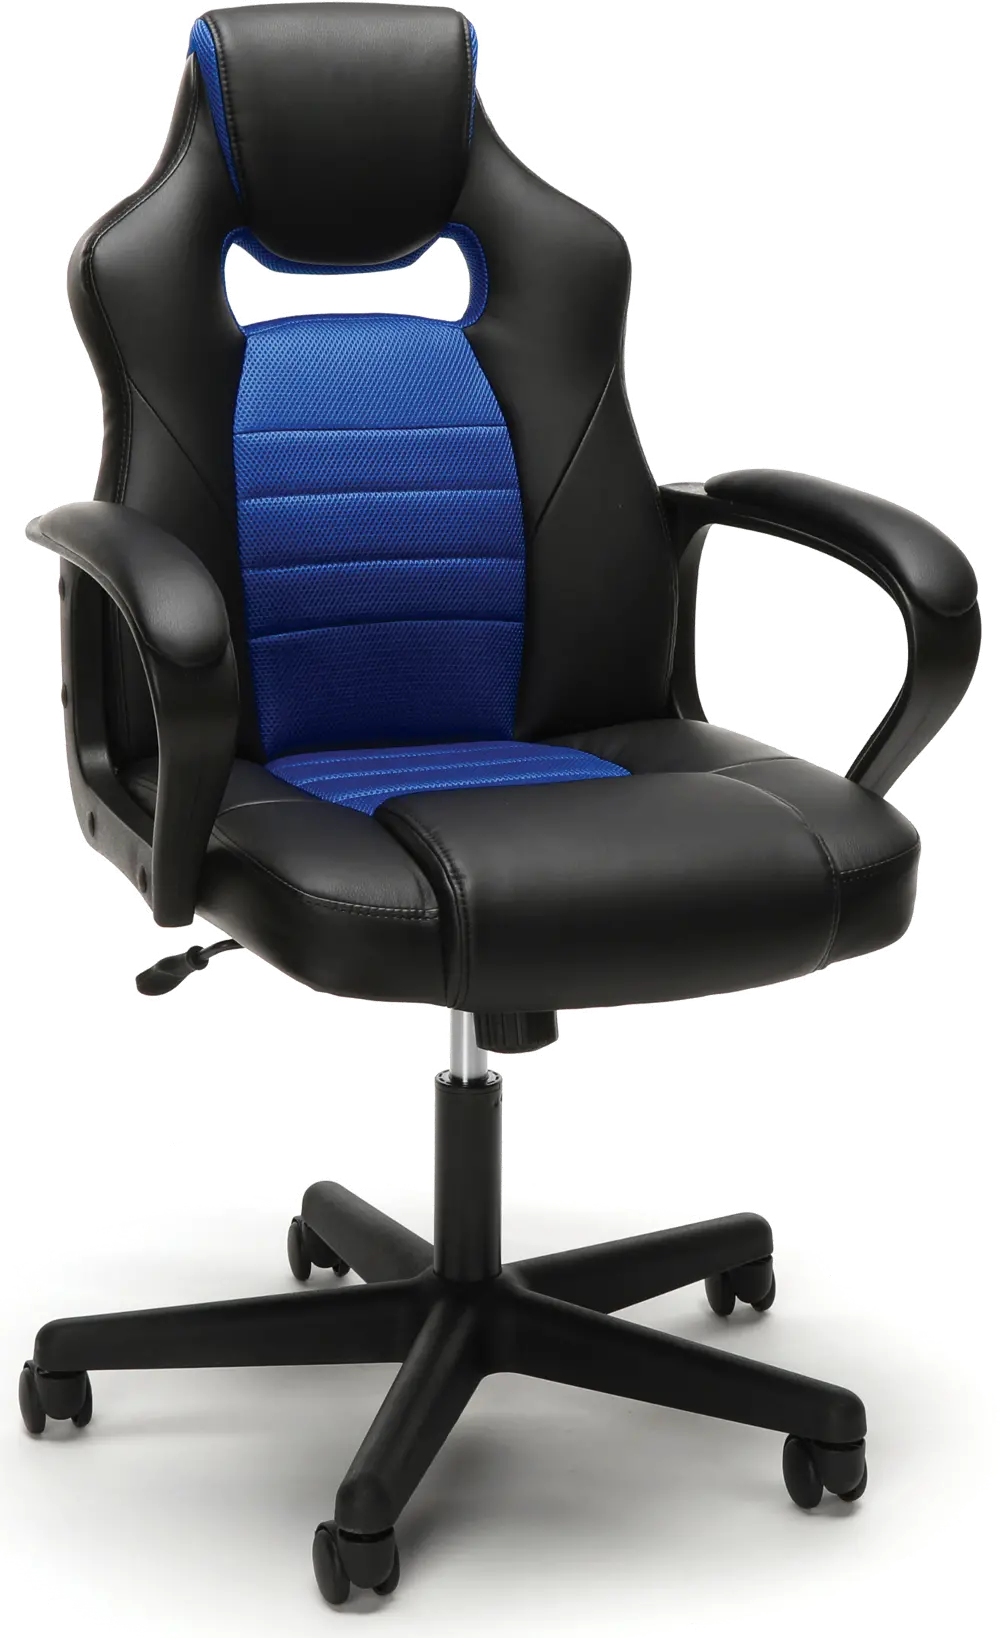 Blue and Black Racing Style Gaming Chair - Essentials-1